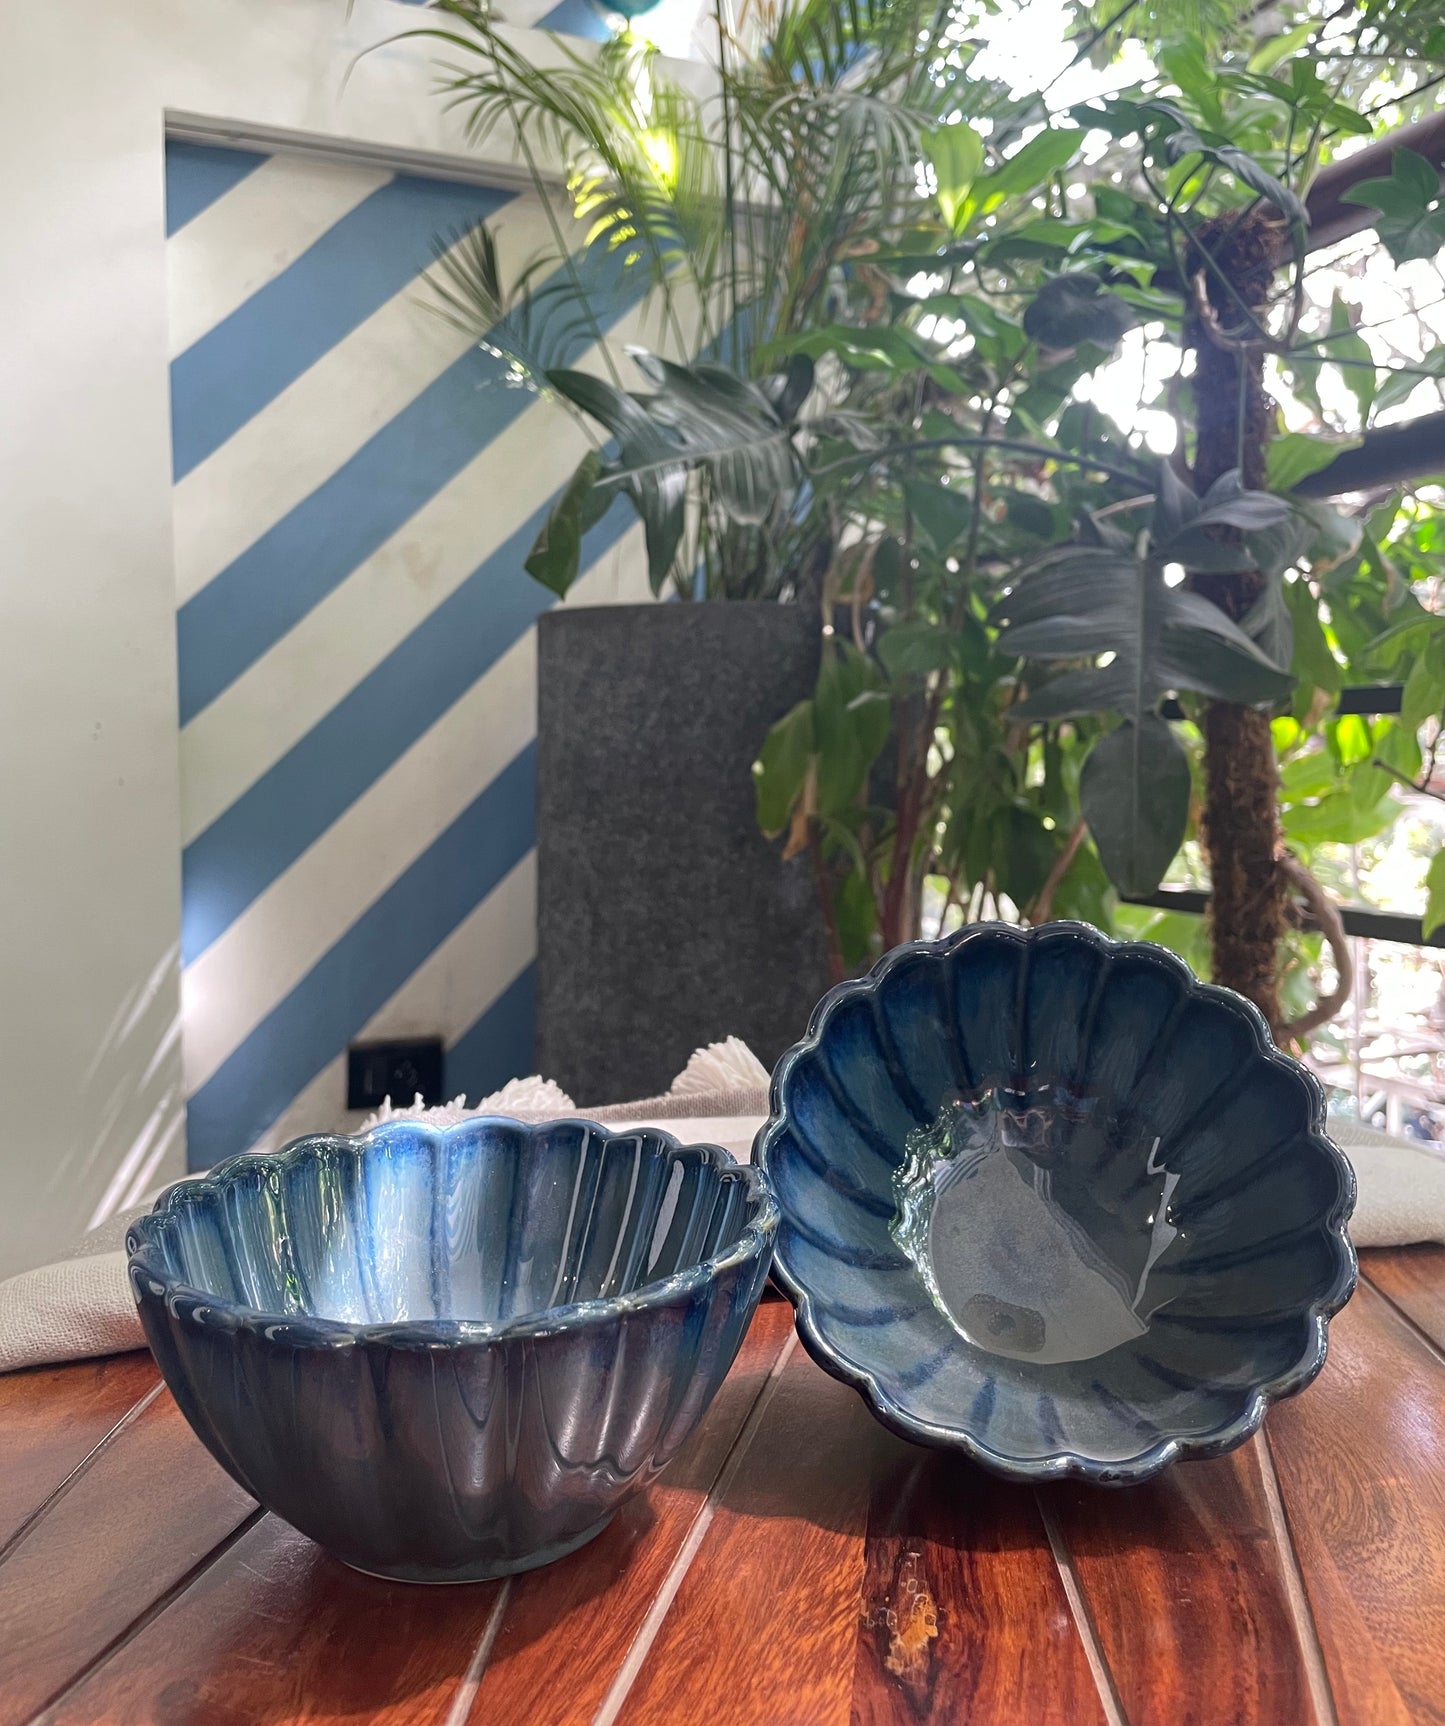 Pair of flower-shaped deep ceramic bowls in blue glaze, one on table, the other tilted, placed in outdoor setting. Buy affordable ceramics in India.